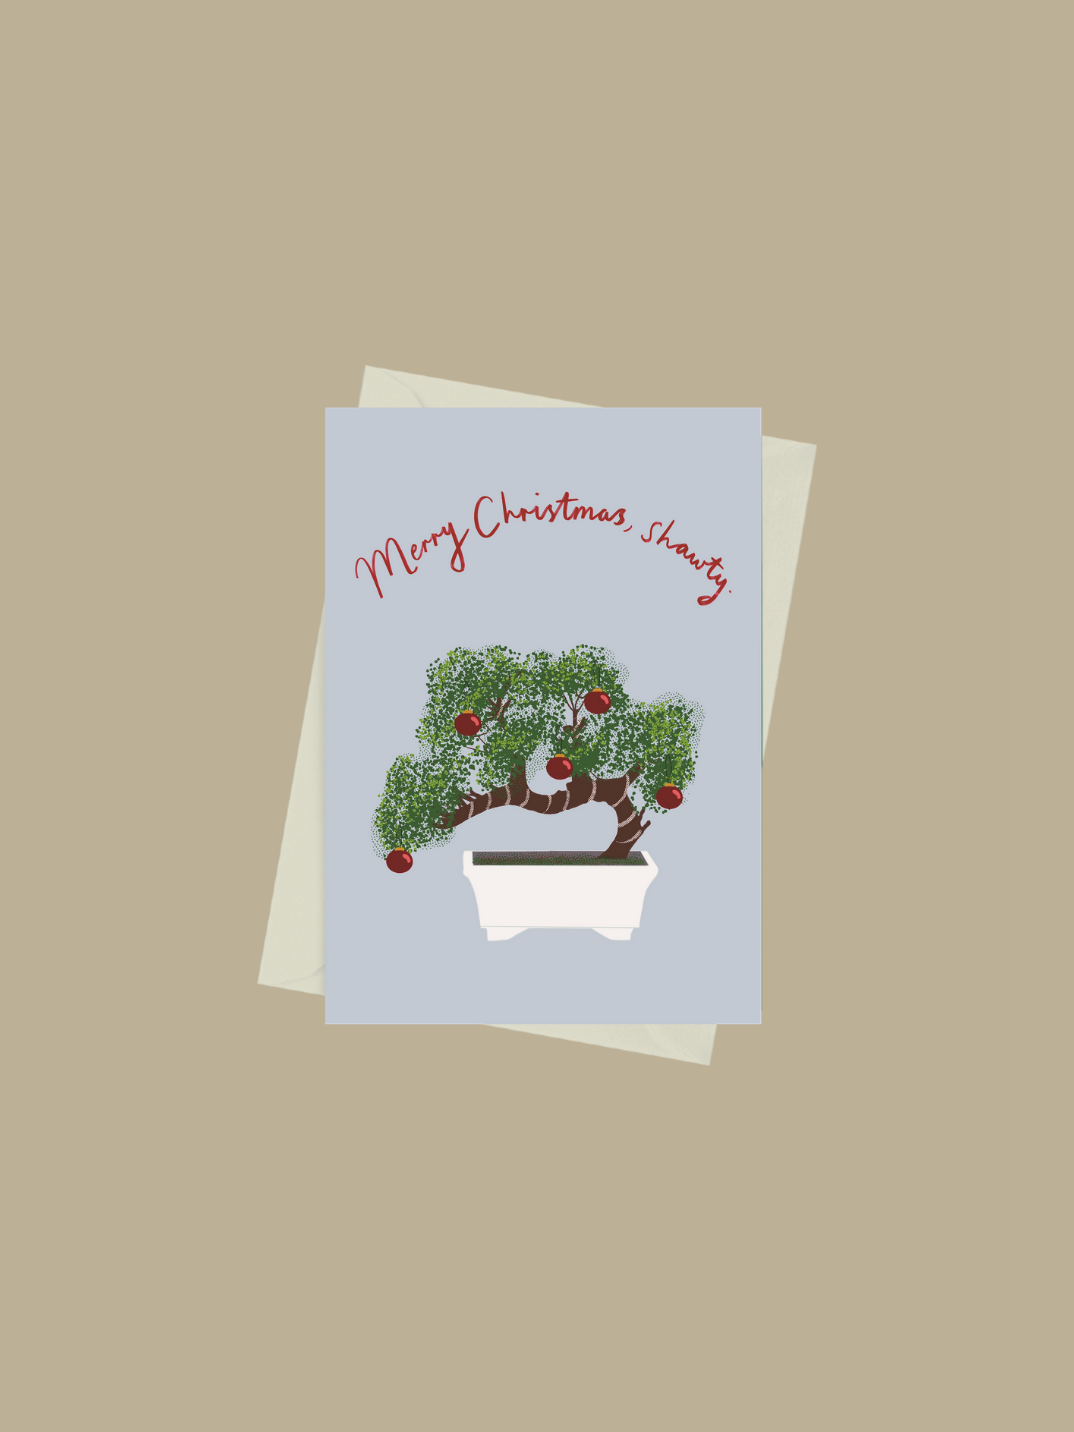 Merry Christmas card greeting card recycled paper sustainable brand